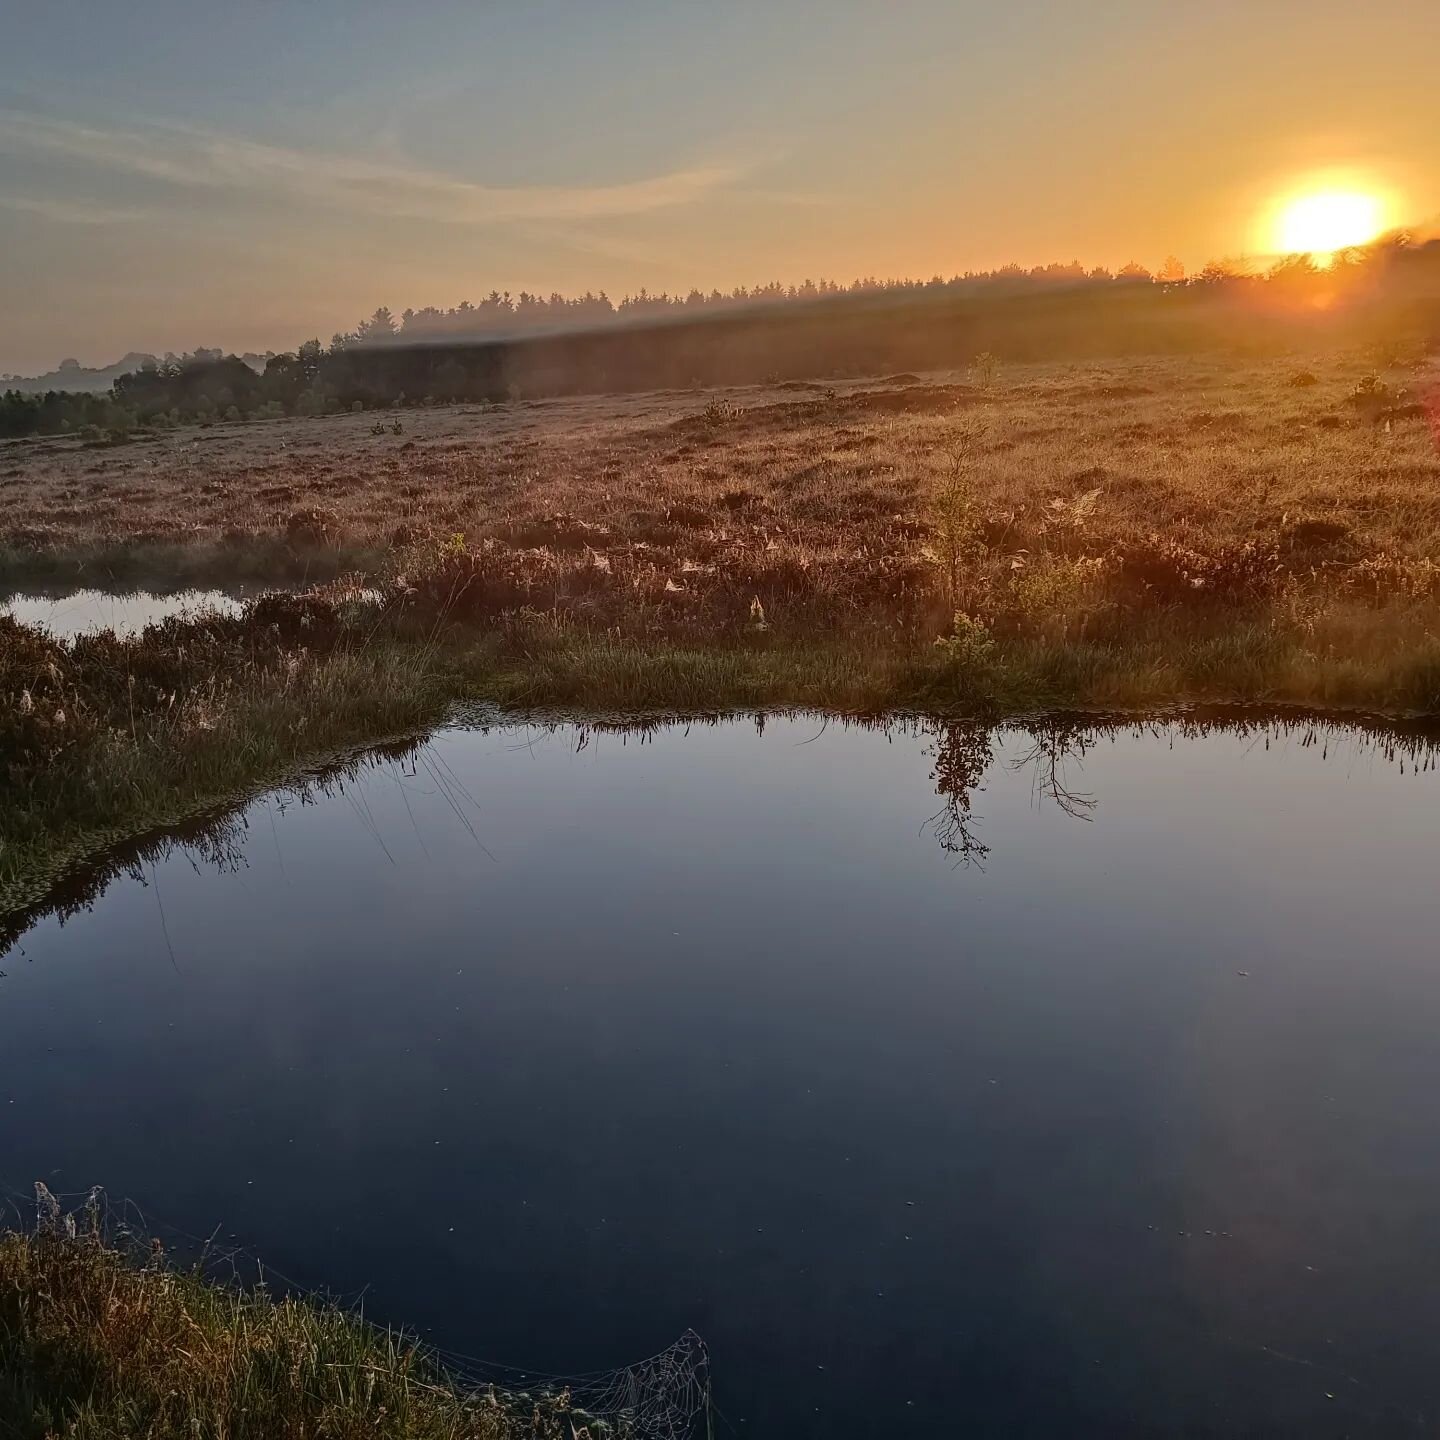 Sunrise on stormanstown.

We have been quiet of late, a busy year that has seen many great things happen within our group.

It's important to rest in winter and go with the seasons as they change.

Lots of stuff happening in the background and plans 